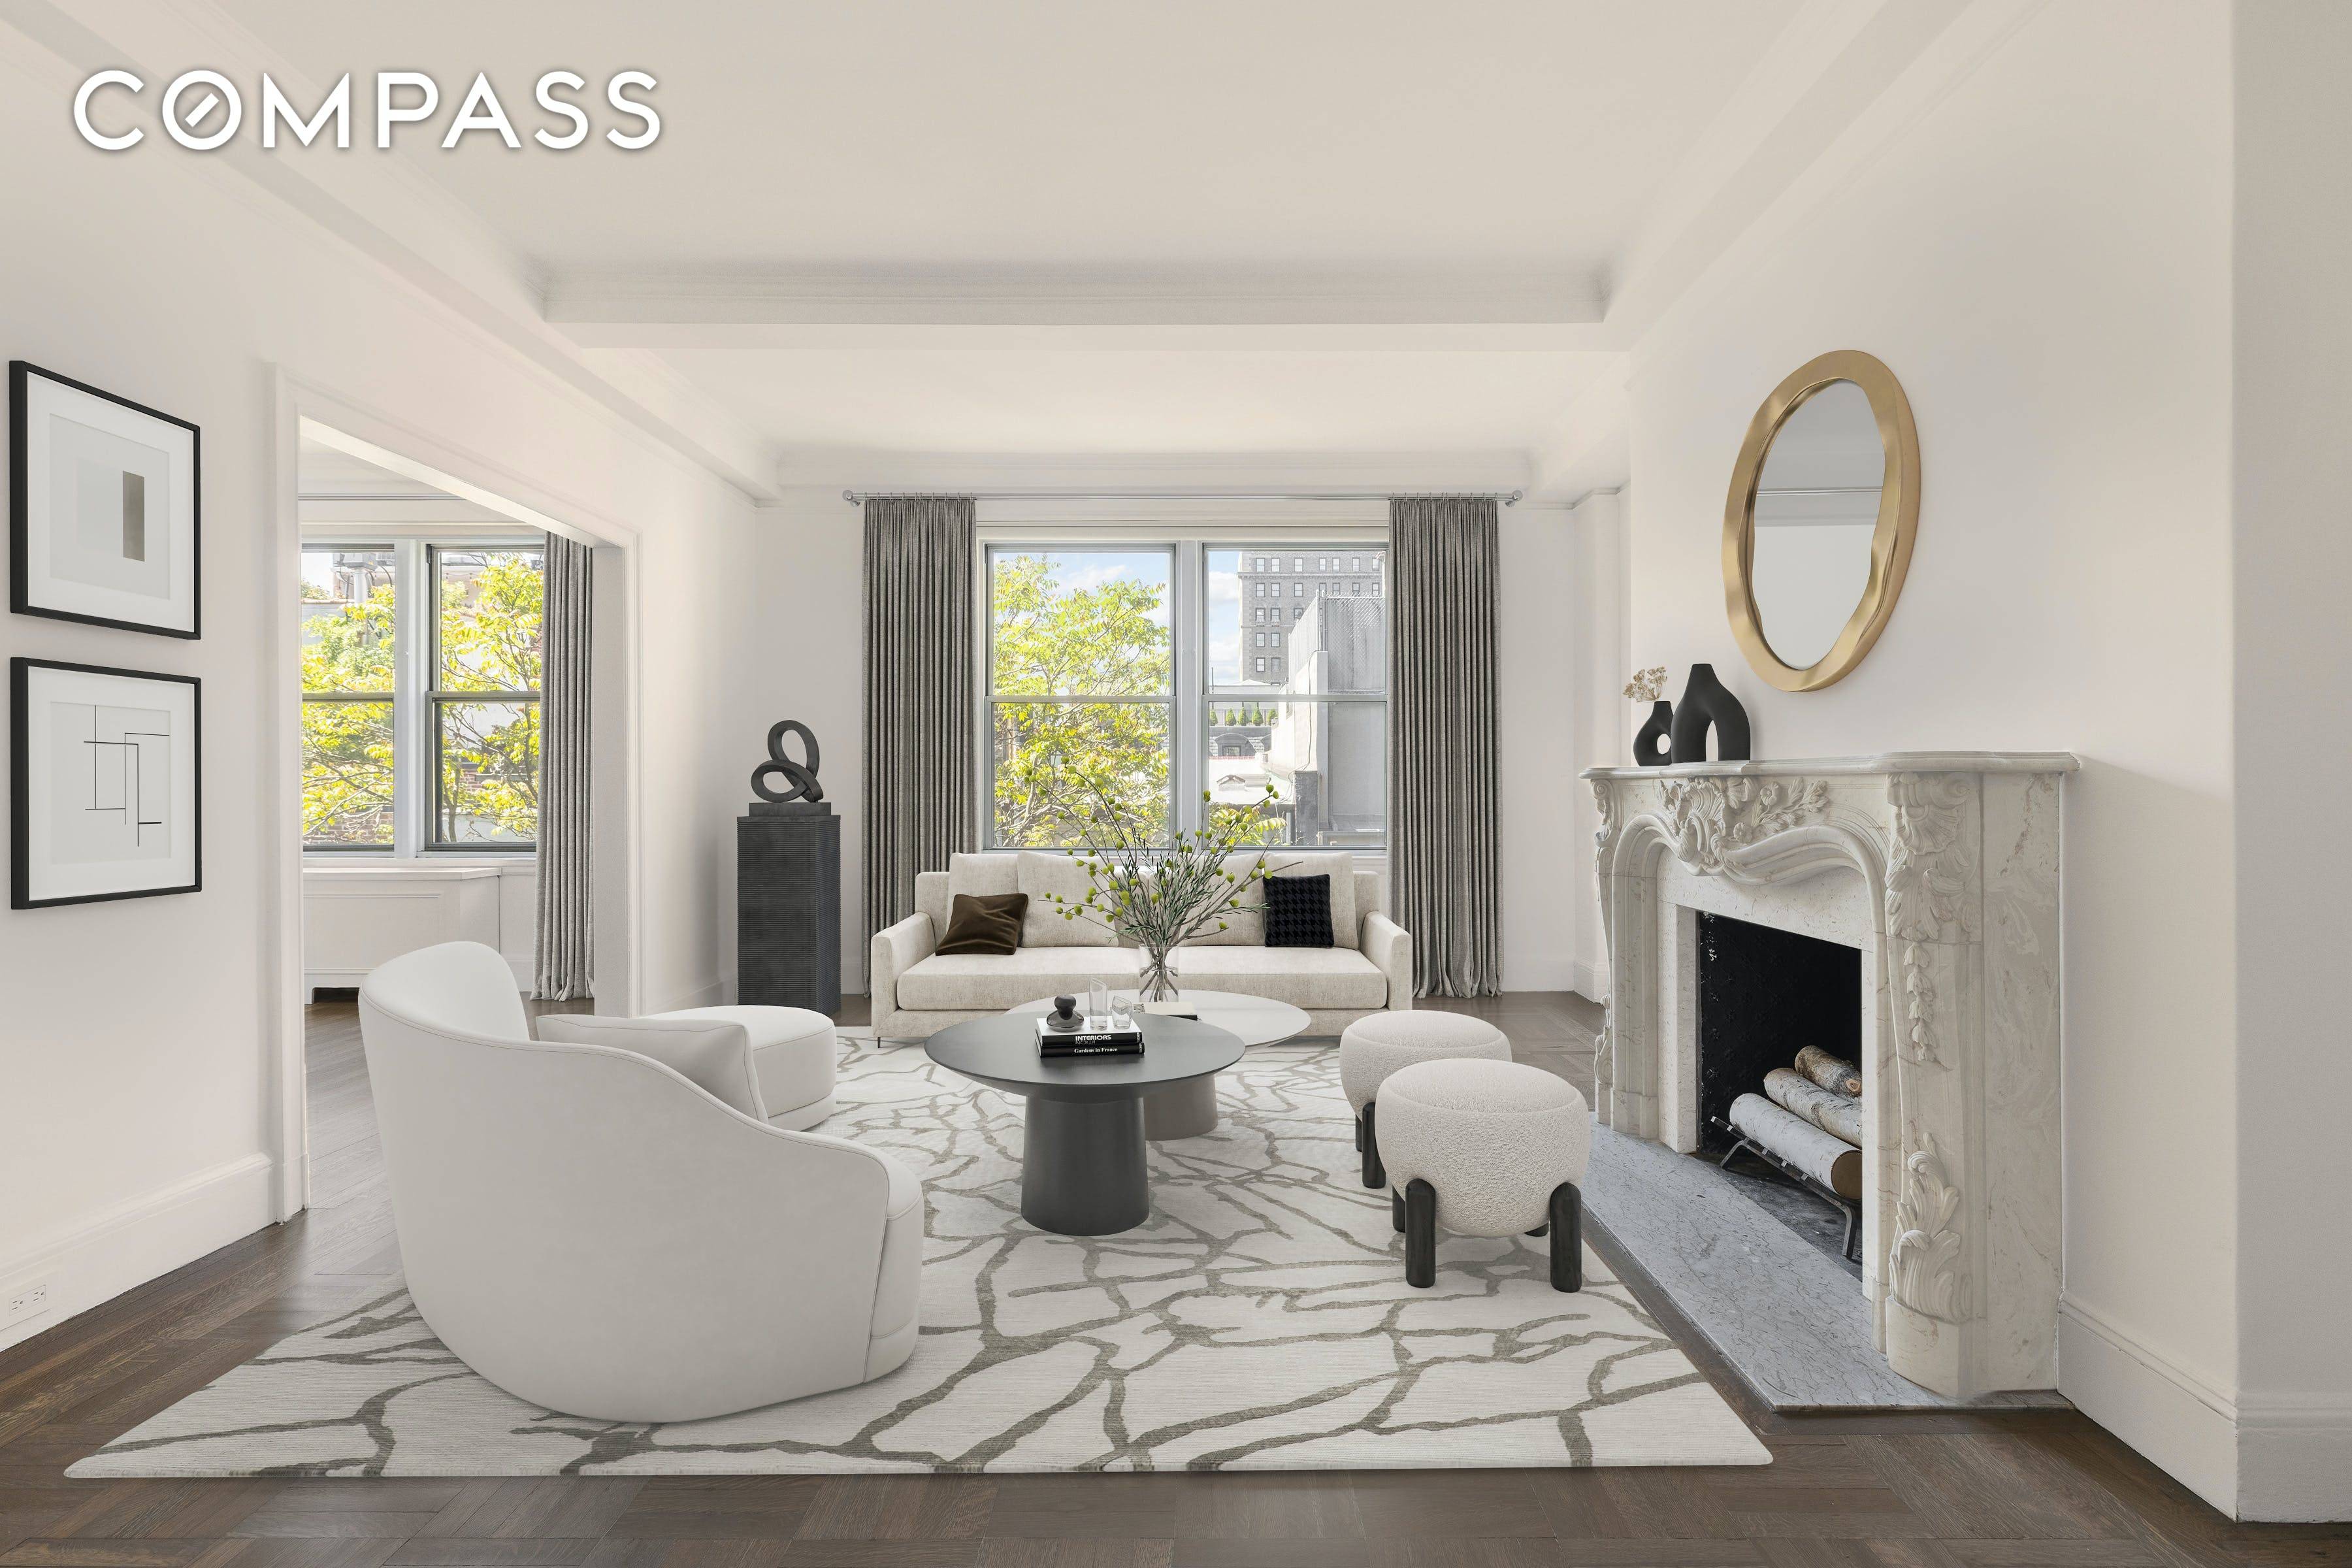 This classic six apartment is rich with elegant, old world charm and modern updates making it the perfect home in a peaceful upper east side neighborhood.